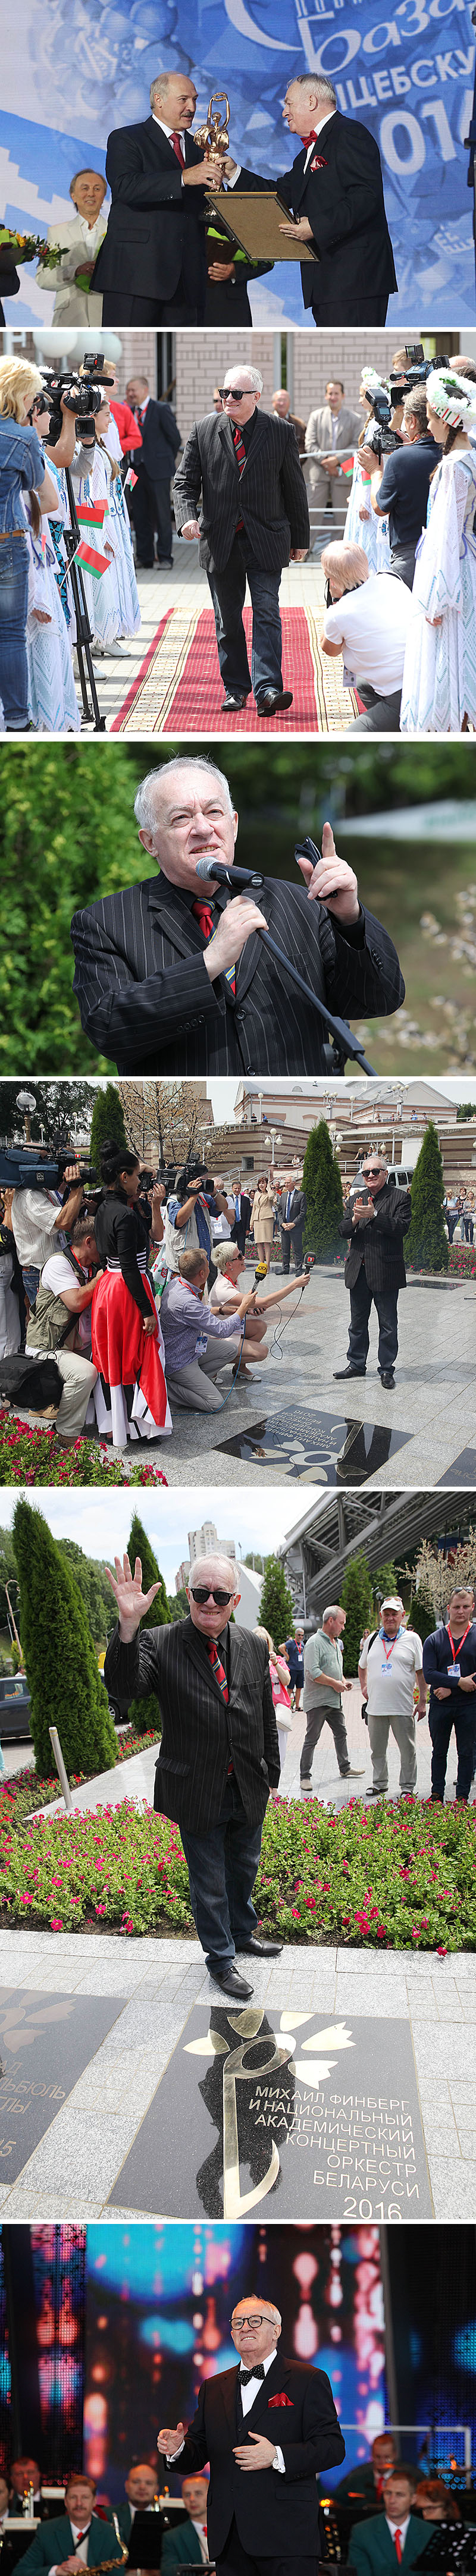 The star-cornflower of Mikhail Finberg and the National Academic Concert Orchestra unveiled on the Square of Stars in Vitebsk, July 2016